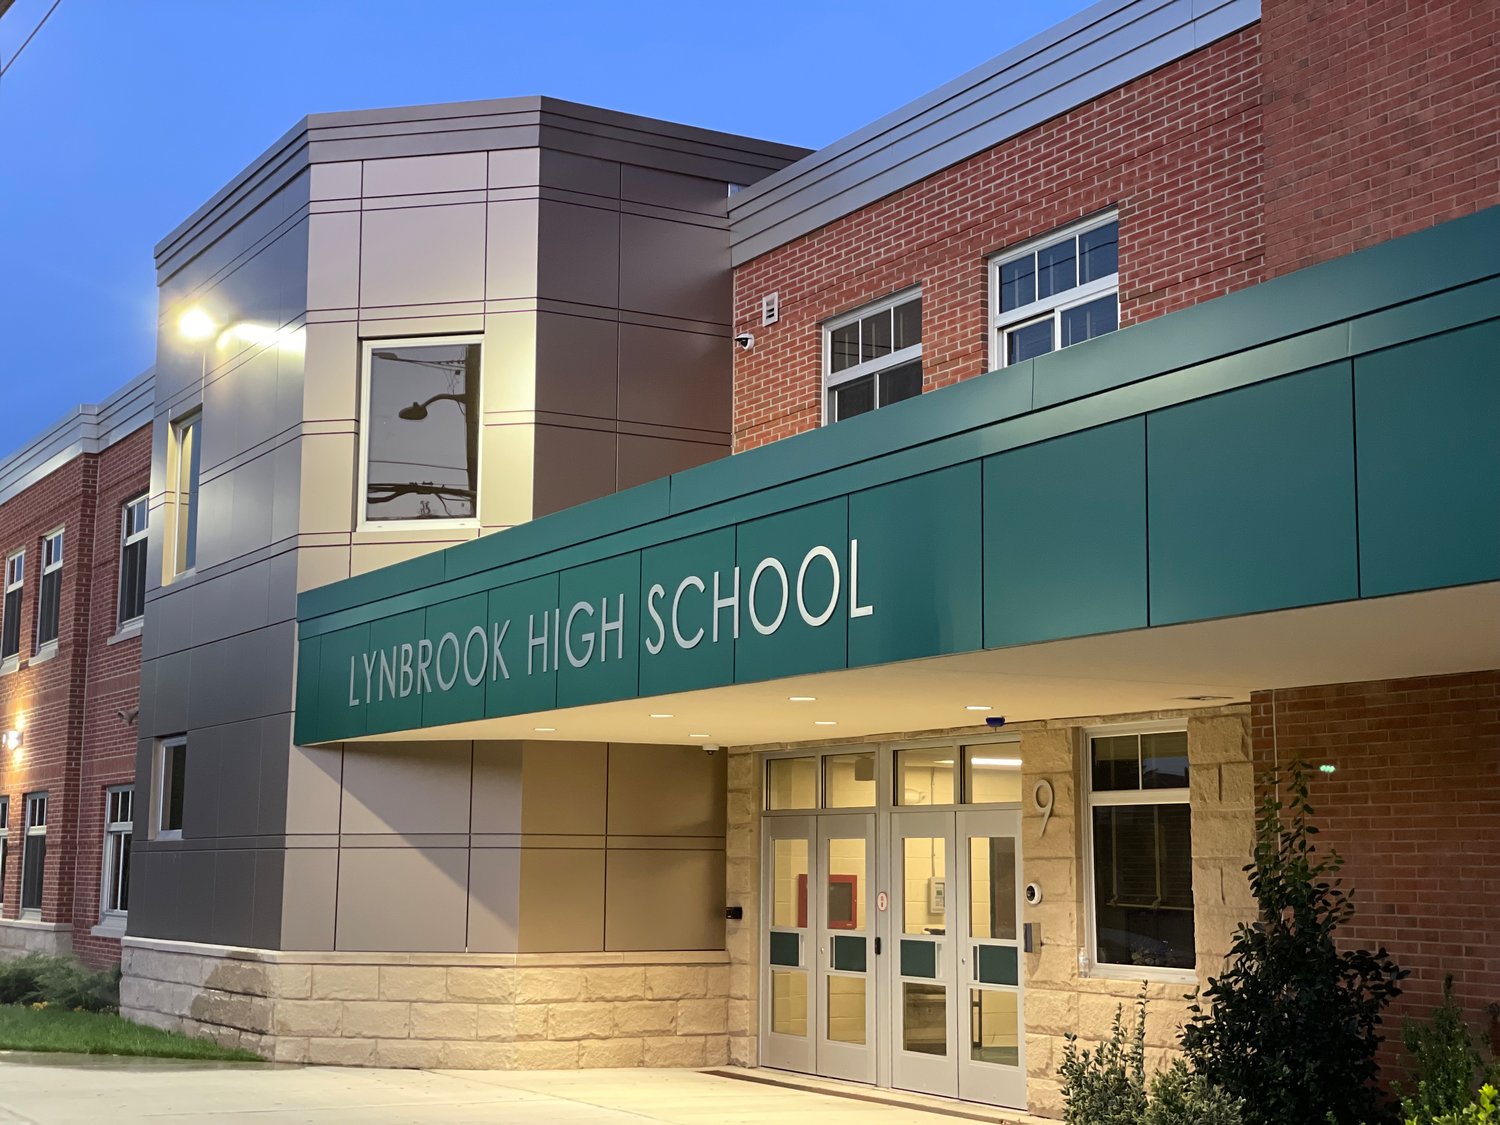 Lynbrook high school was awarded with the National Blue Ribbon award by the U.S. Department of Education for the academic excellence of its students.